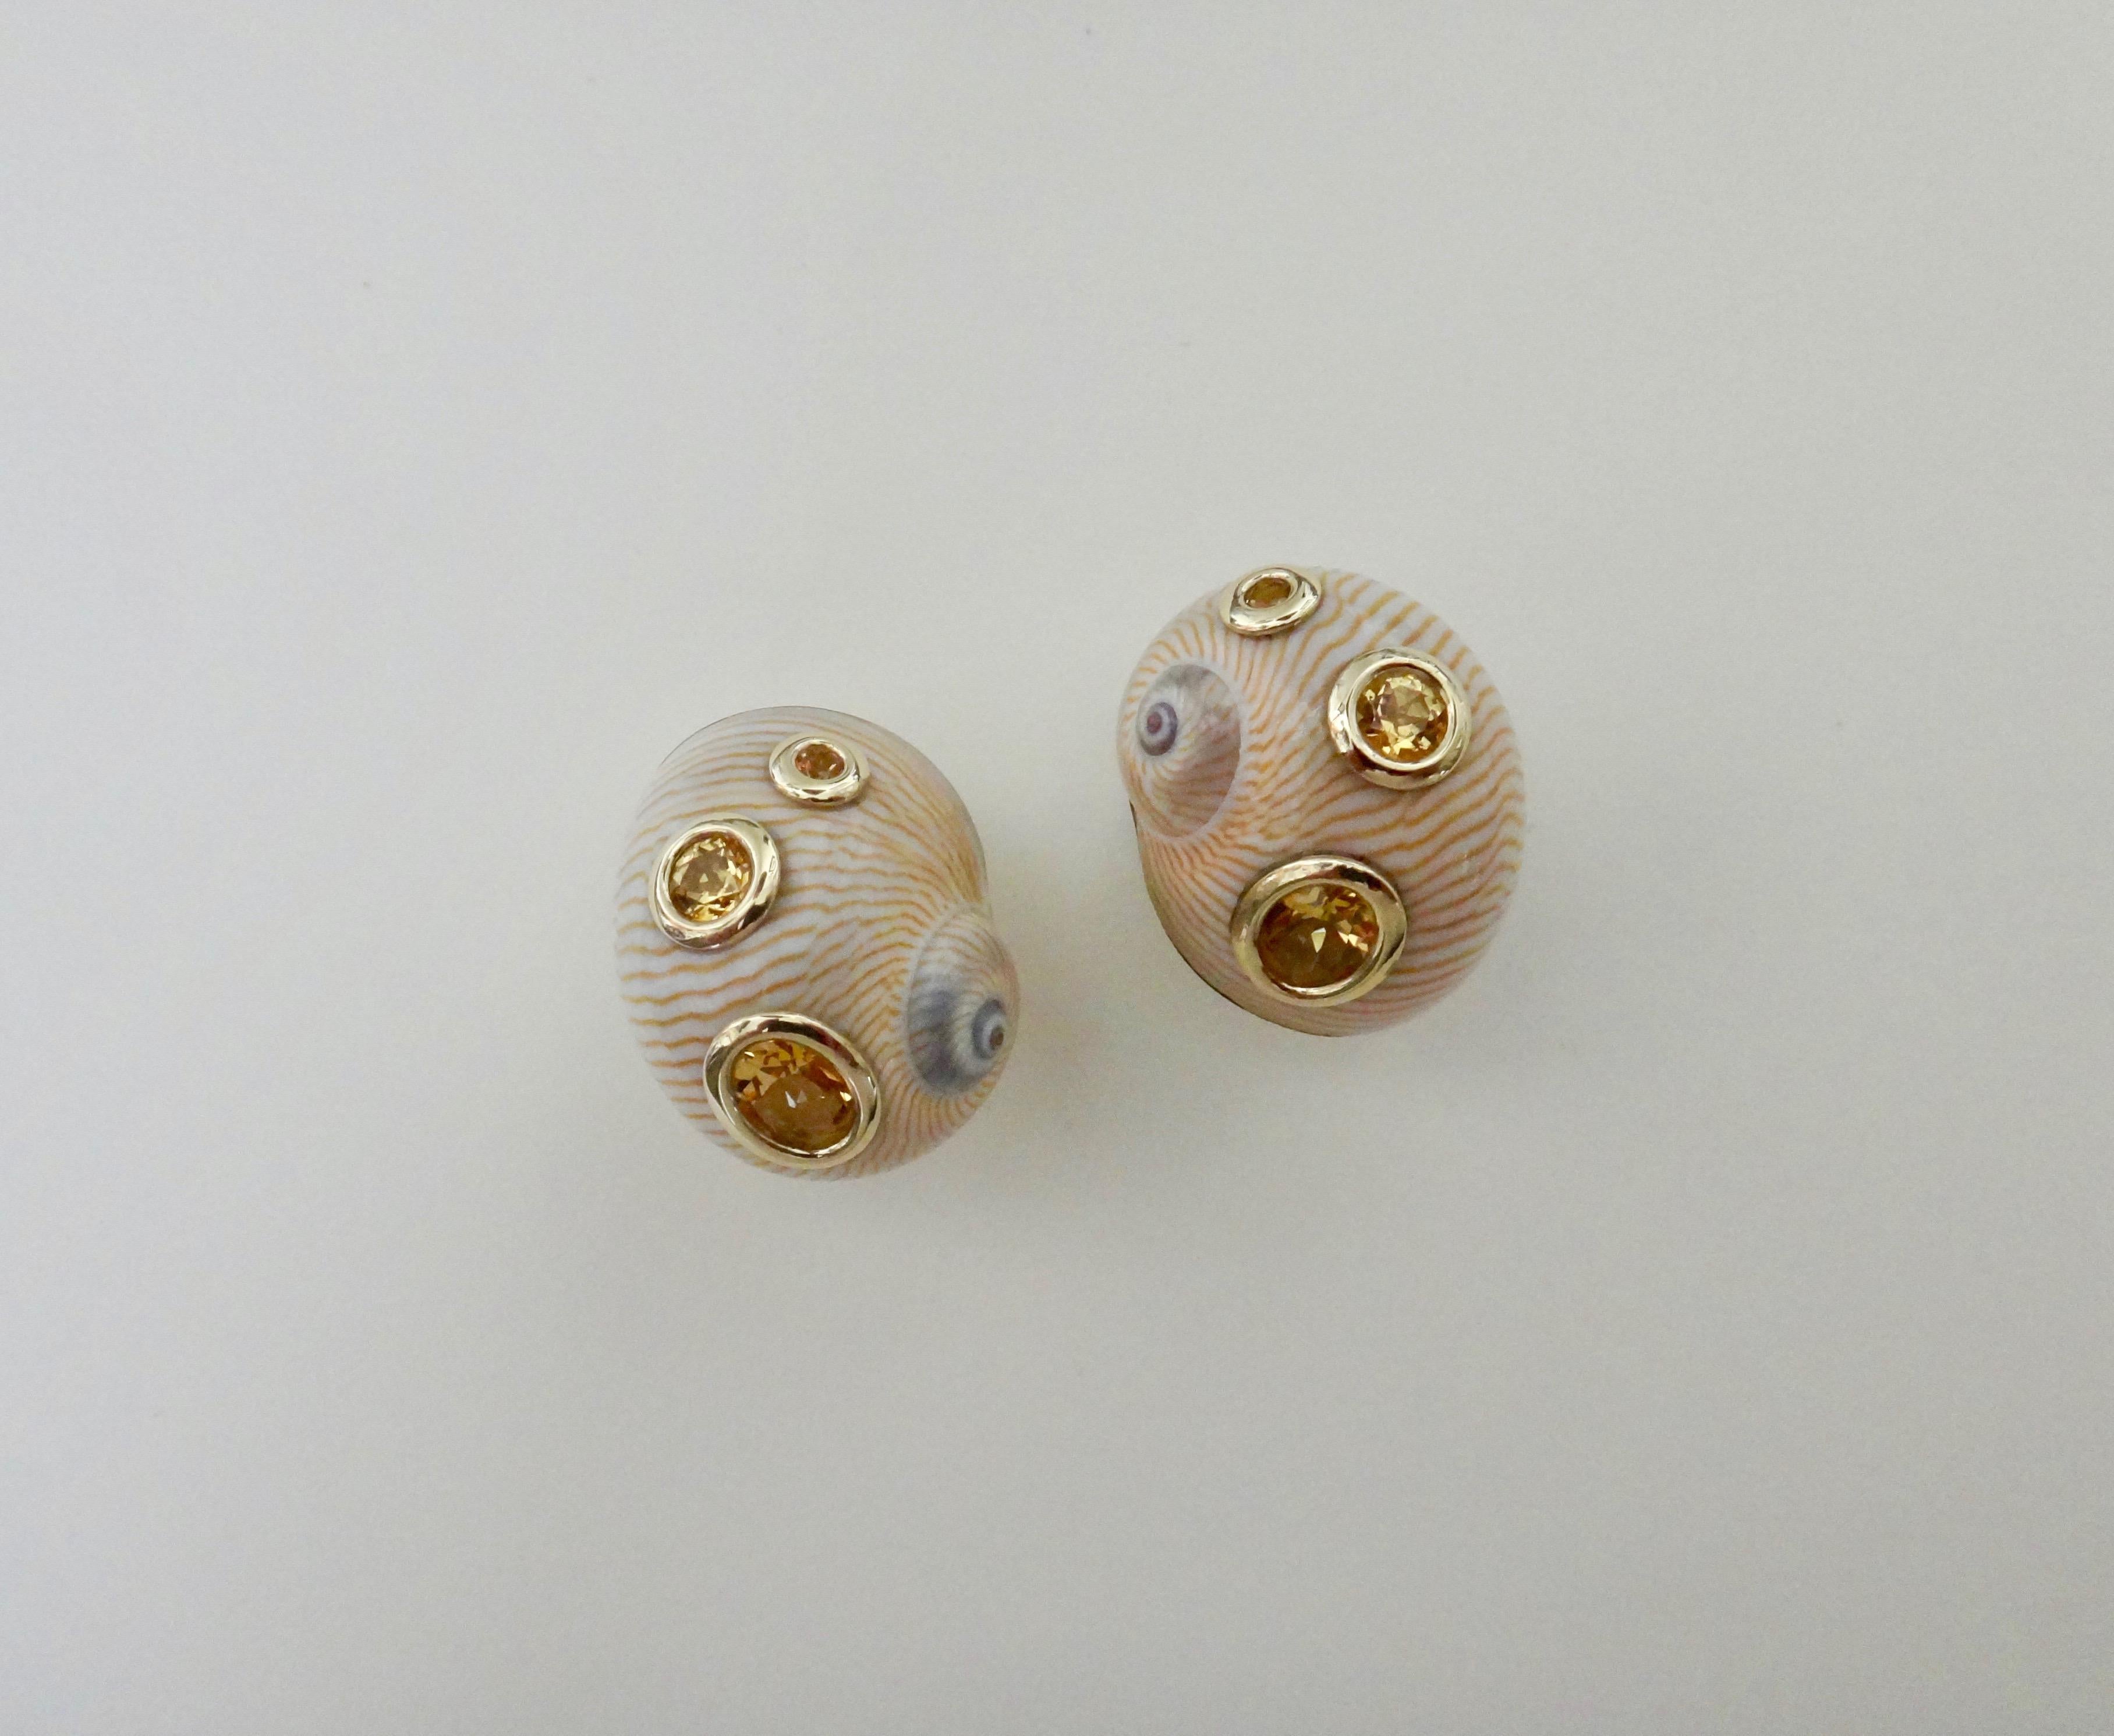 Natural olive shells create the foundations for these button earrings.  The highly polished cream and tawny colored shells have been studded with bezel set golden topaz in round and oval shapes.  The earrings are backed in 18K yellow gold and come